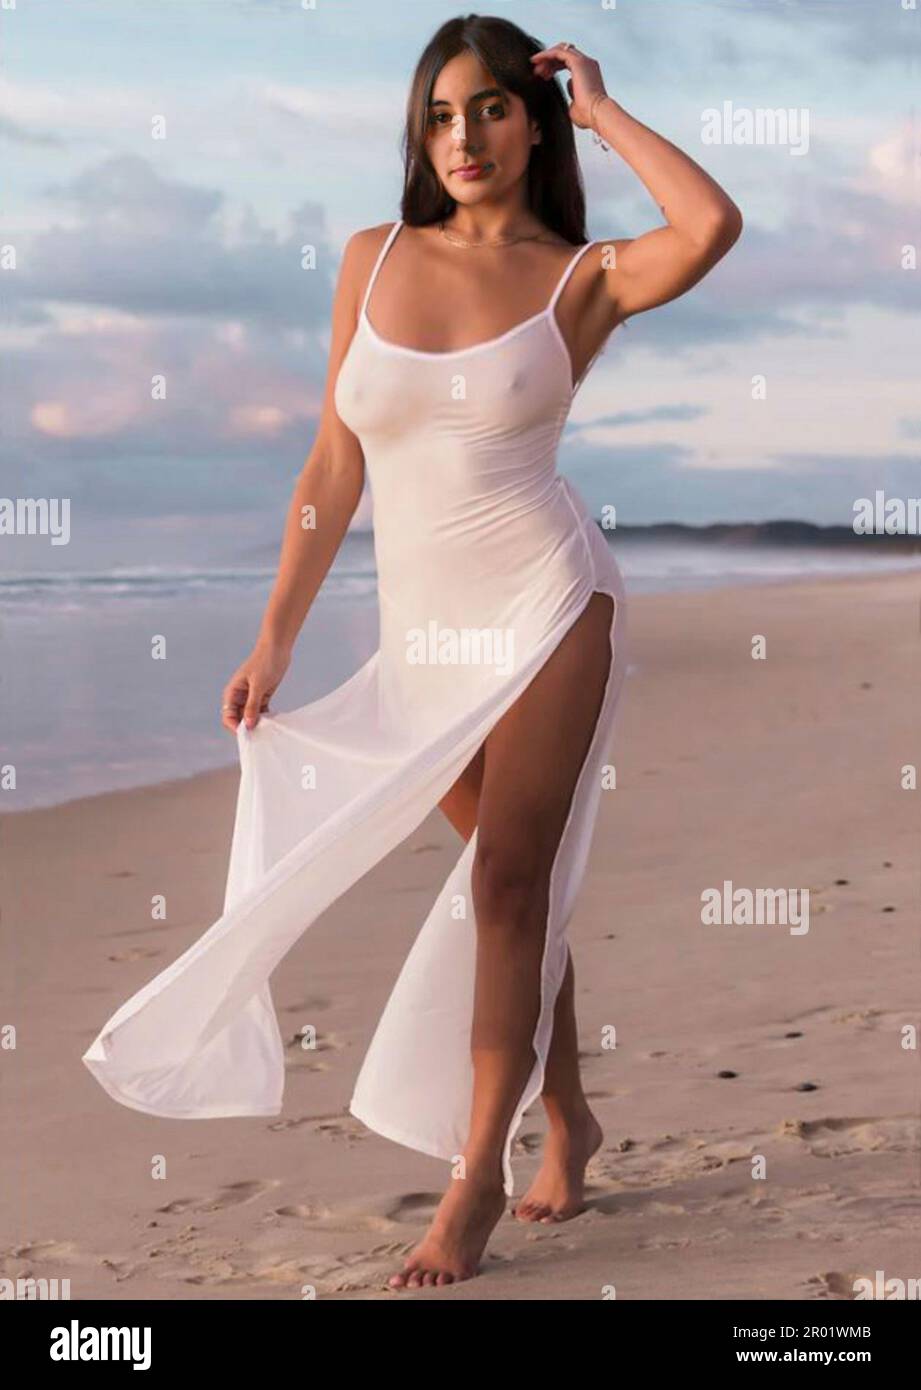 Glamorous brunette young woman wearing a long see-through white dress with high split side, walks along a deserted beach at sundown.  MODEL RELEASED Stock Photo